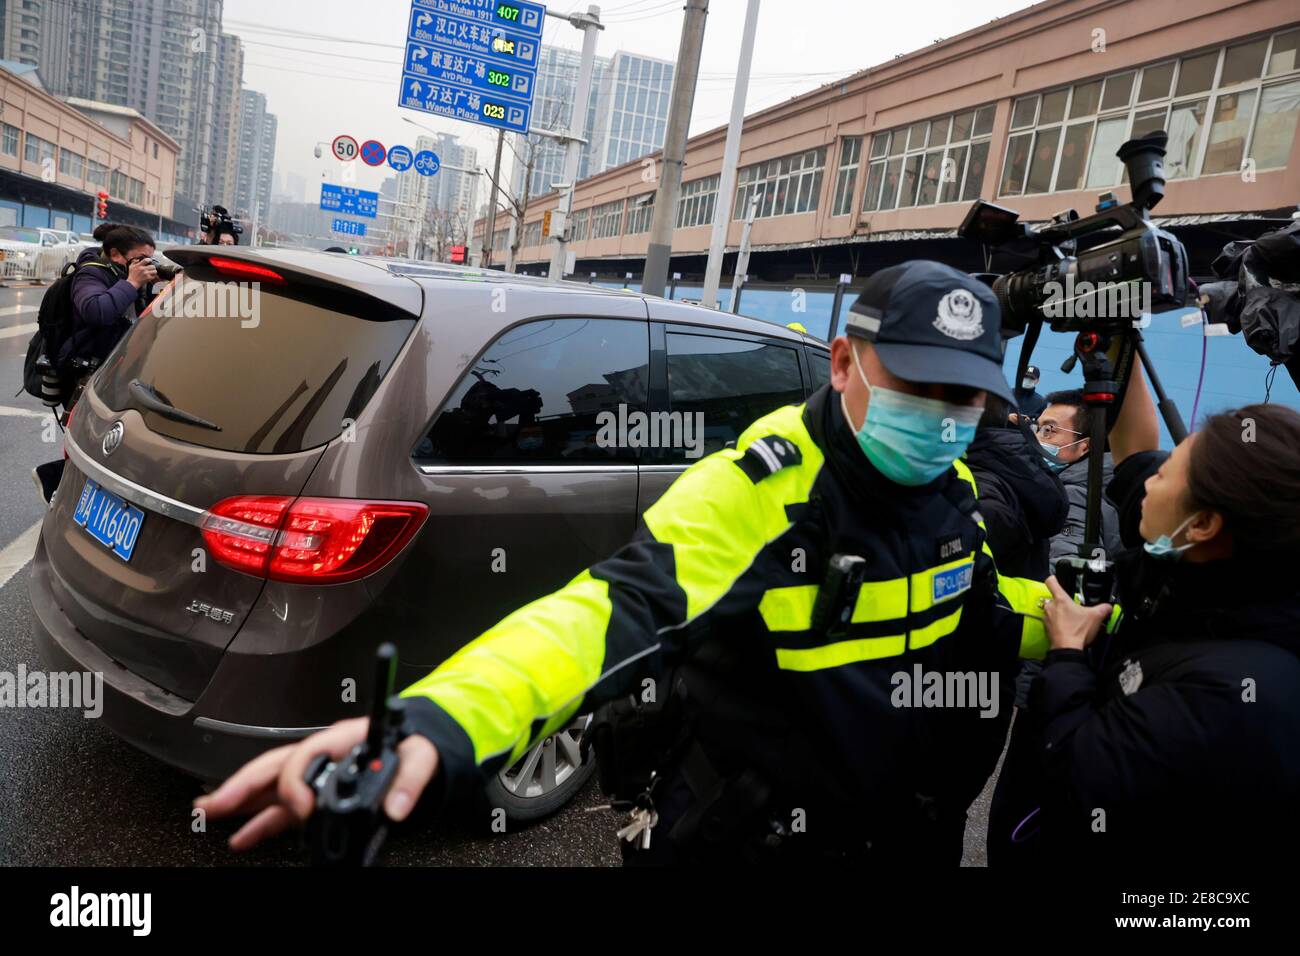 A car carrying members of the World Health Organization (WHO) team tasked with investigating the origins of the coronavirus disease (COVID-19) arrives at Huanan seafood market in Wuhan, Hubei province, China January 31, 2021. REUTERS/Thomas Peter Stock Photo